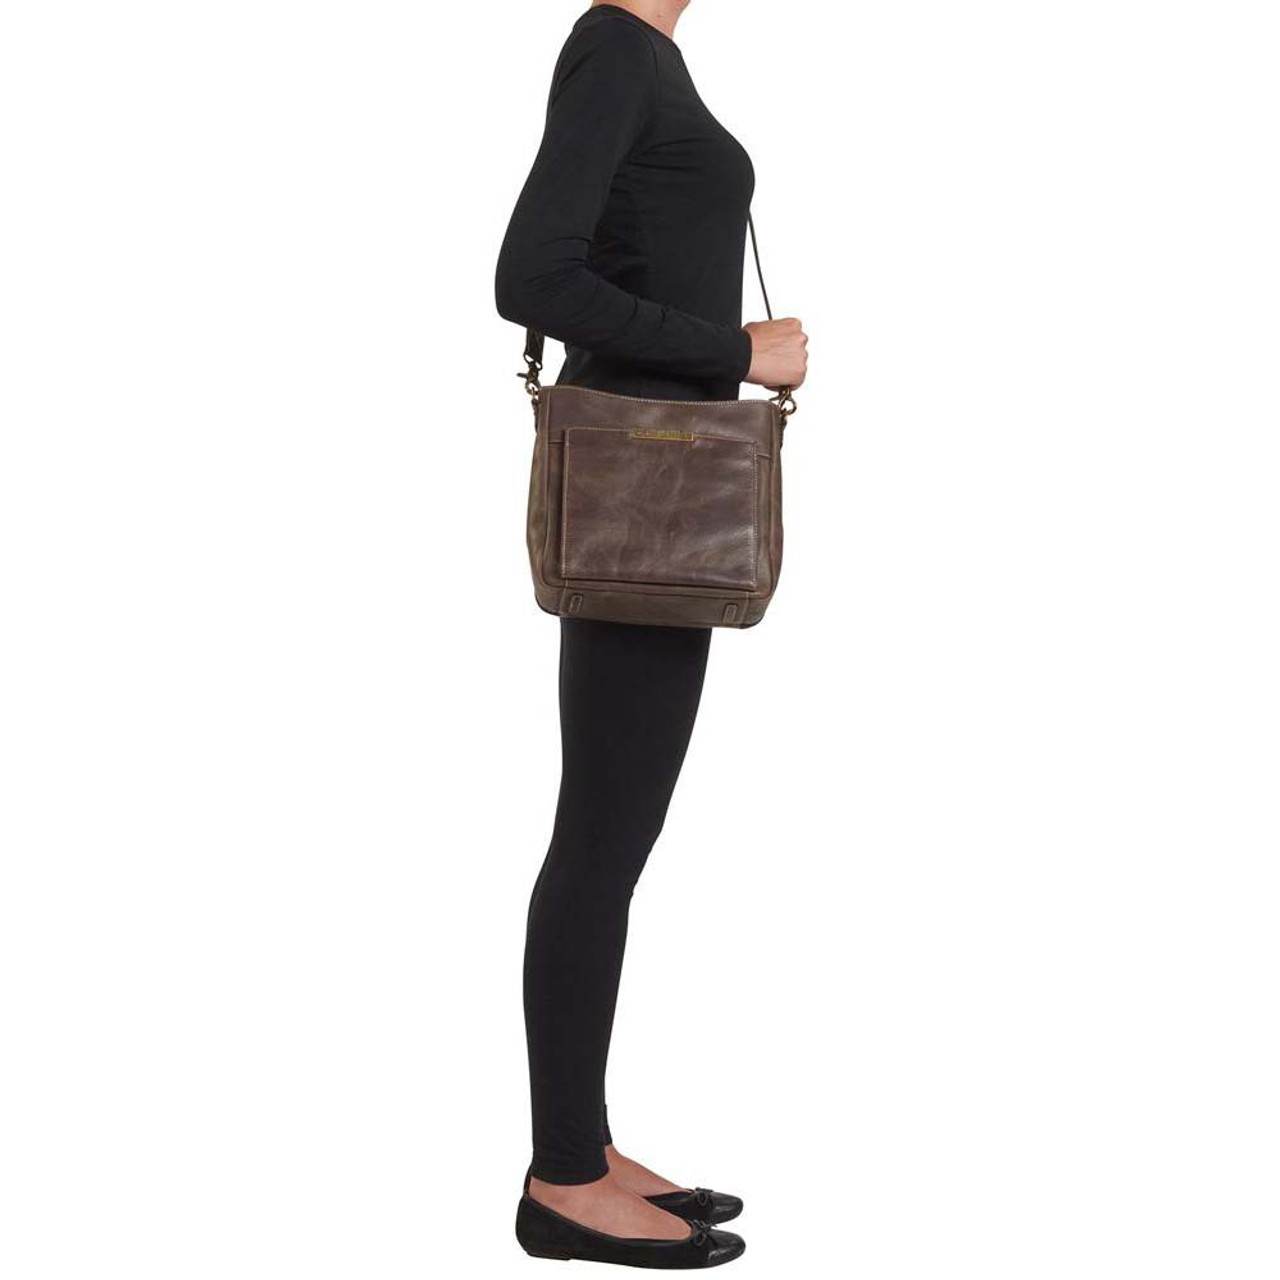 GTM Concealed Carry Flat Sac Handbag, Black, Small : Amazon.ca: Clothing,  Shoes & Accessories